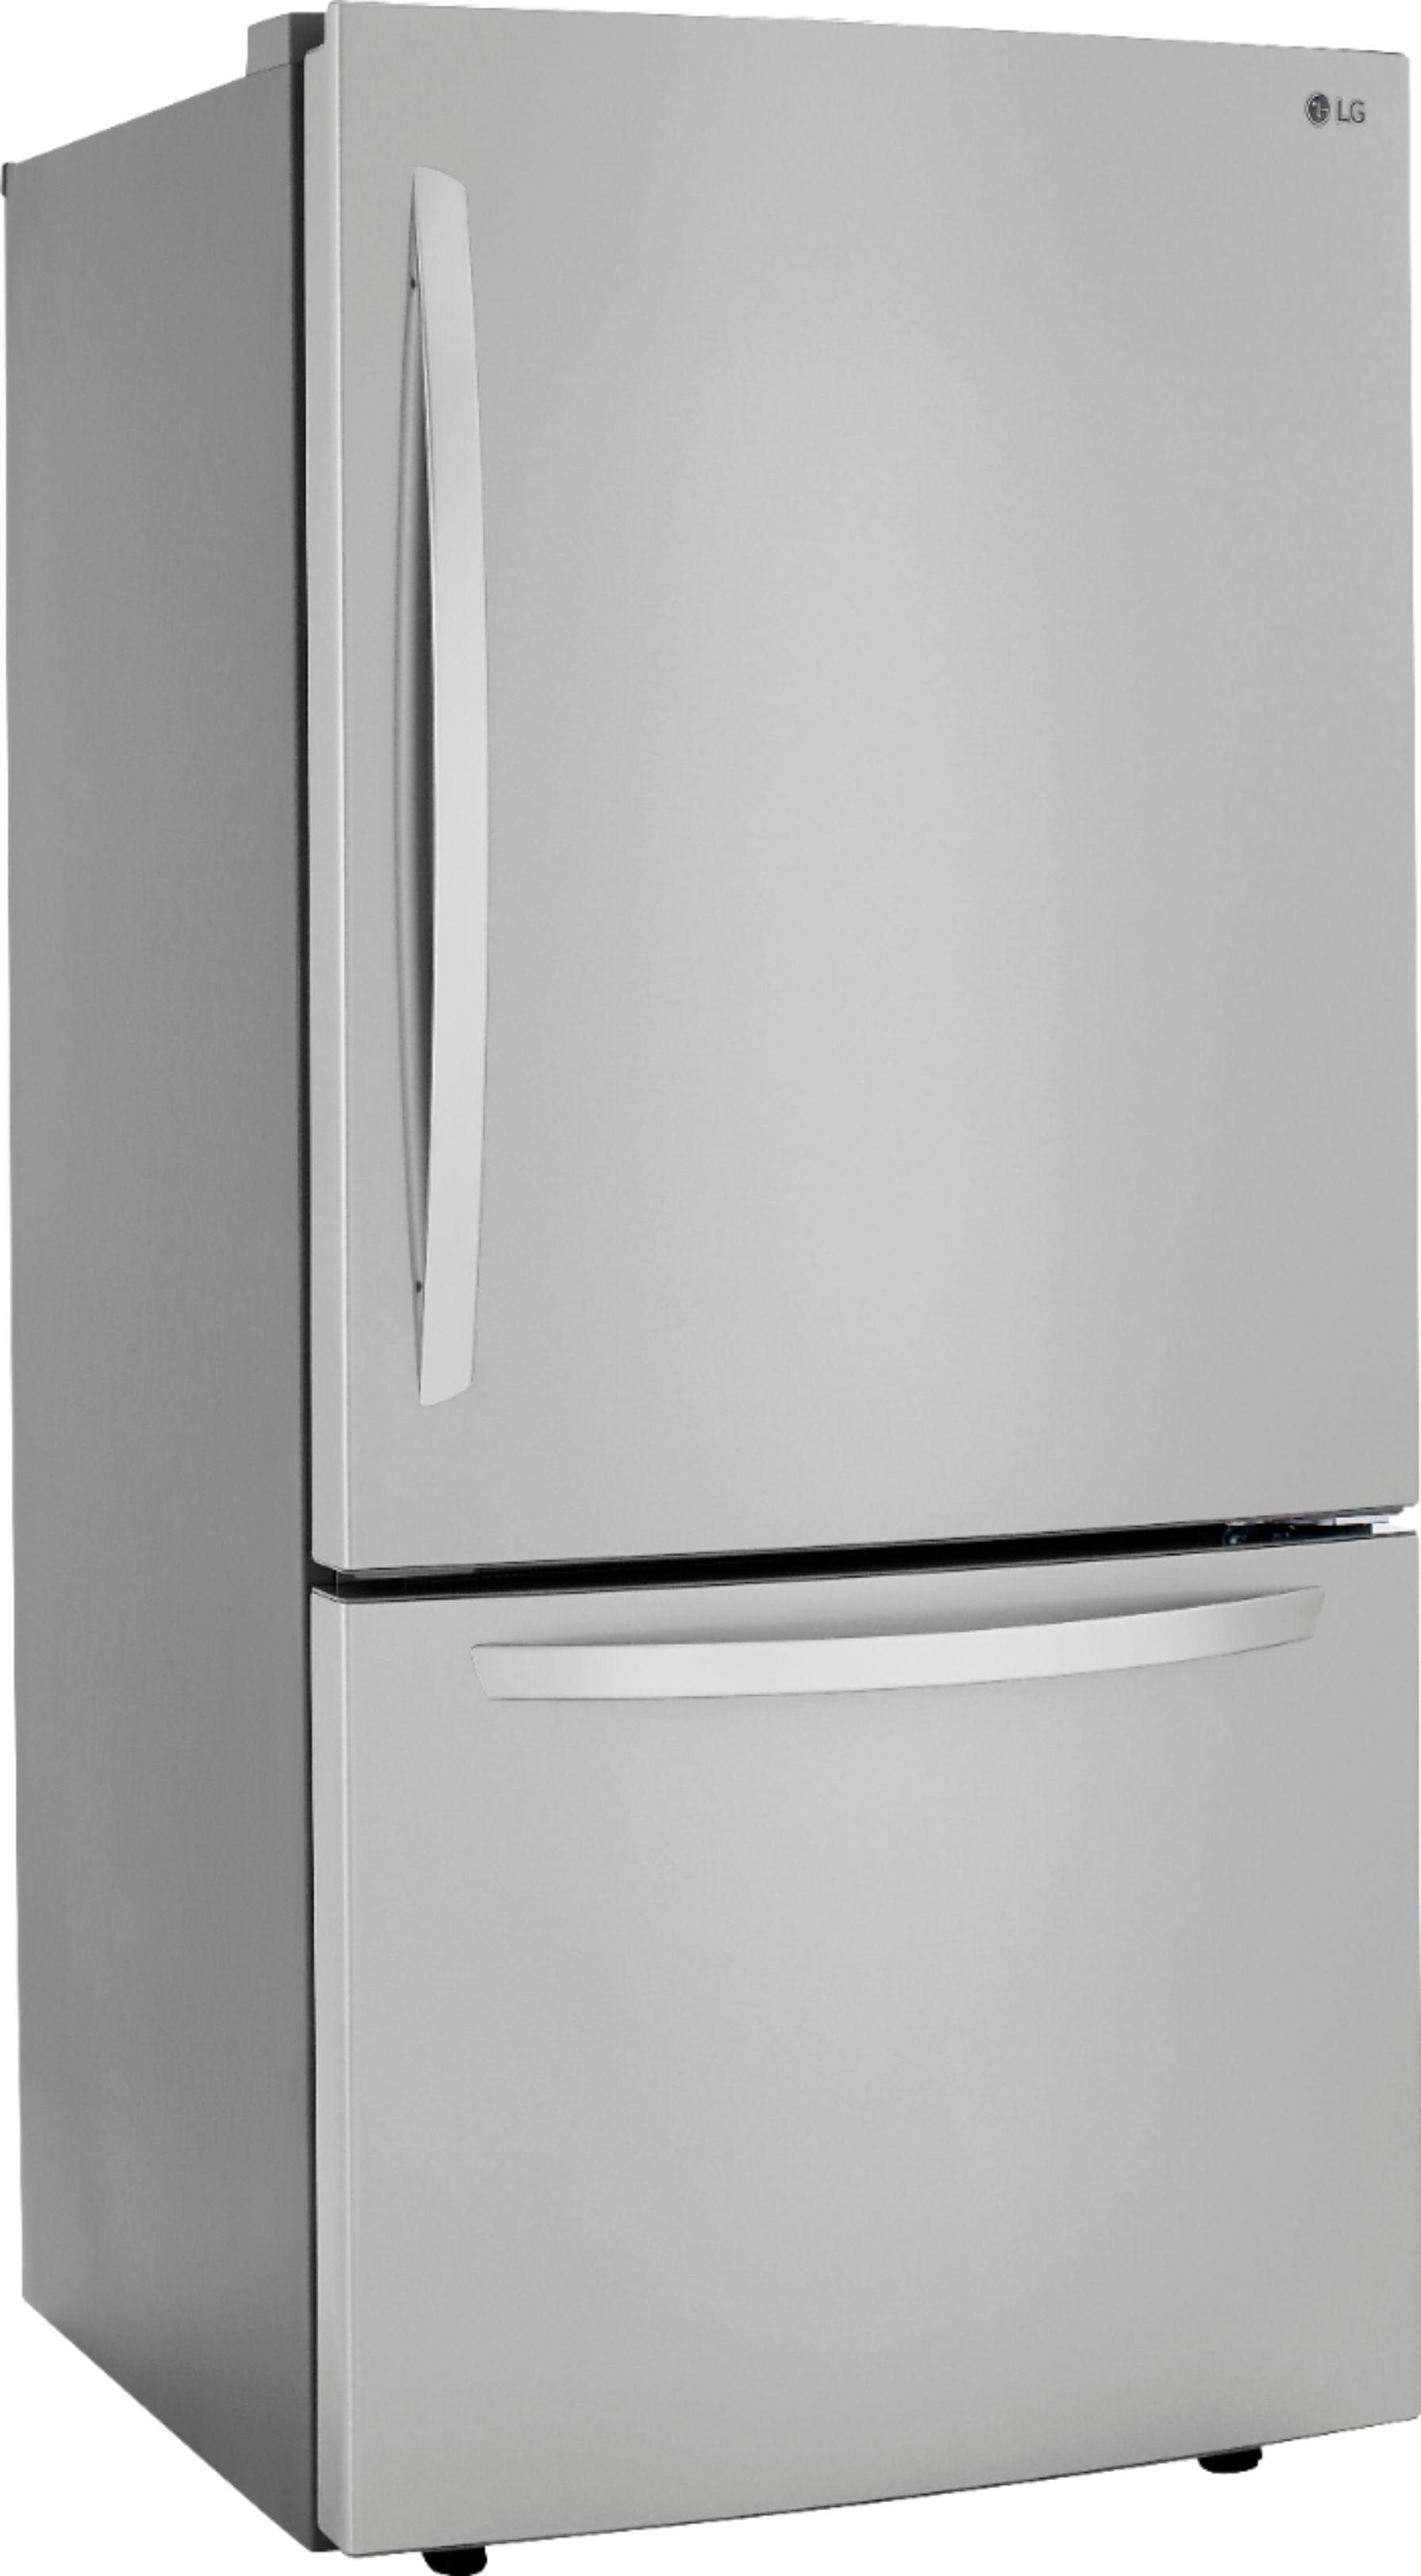 Angle View: LG - 25.5 Cu. Ft. Bottom-Freezer Refrigerator with Ice Maker - Stainless Steel